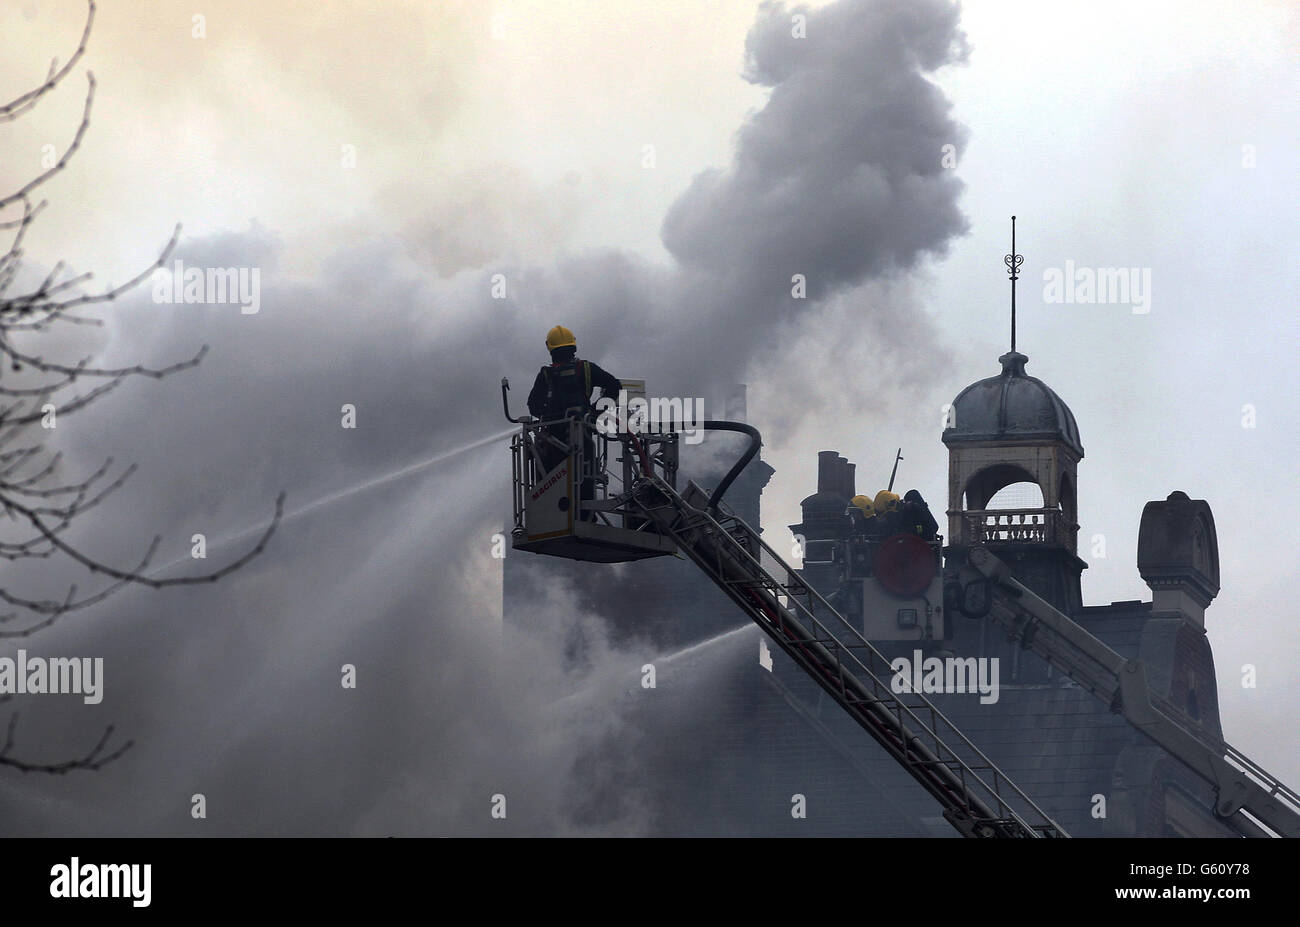 Firefighters attend the blaze at at the Newington Library on Walworth Road, Southwark, London. Stock Photo